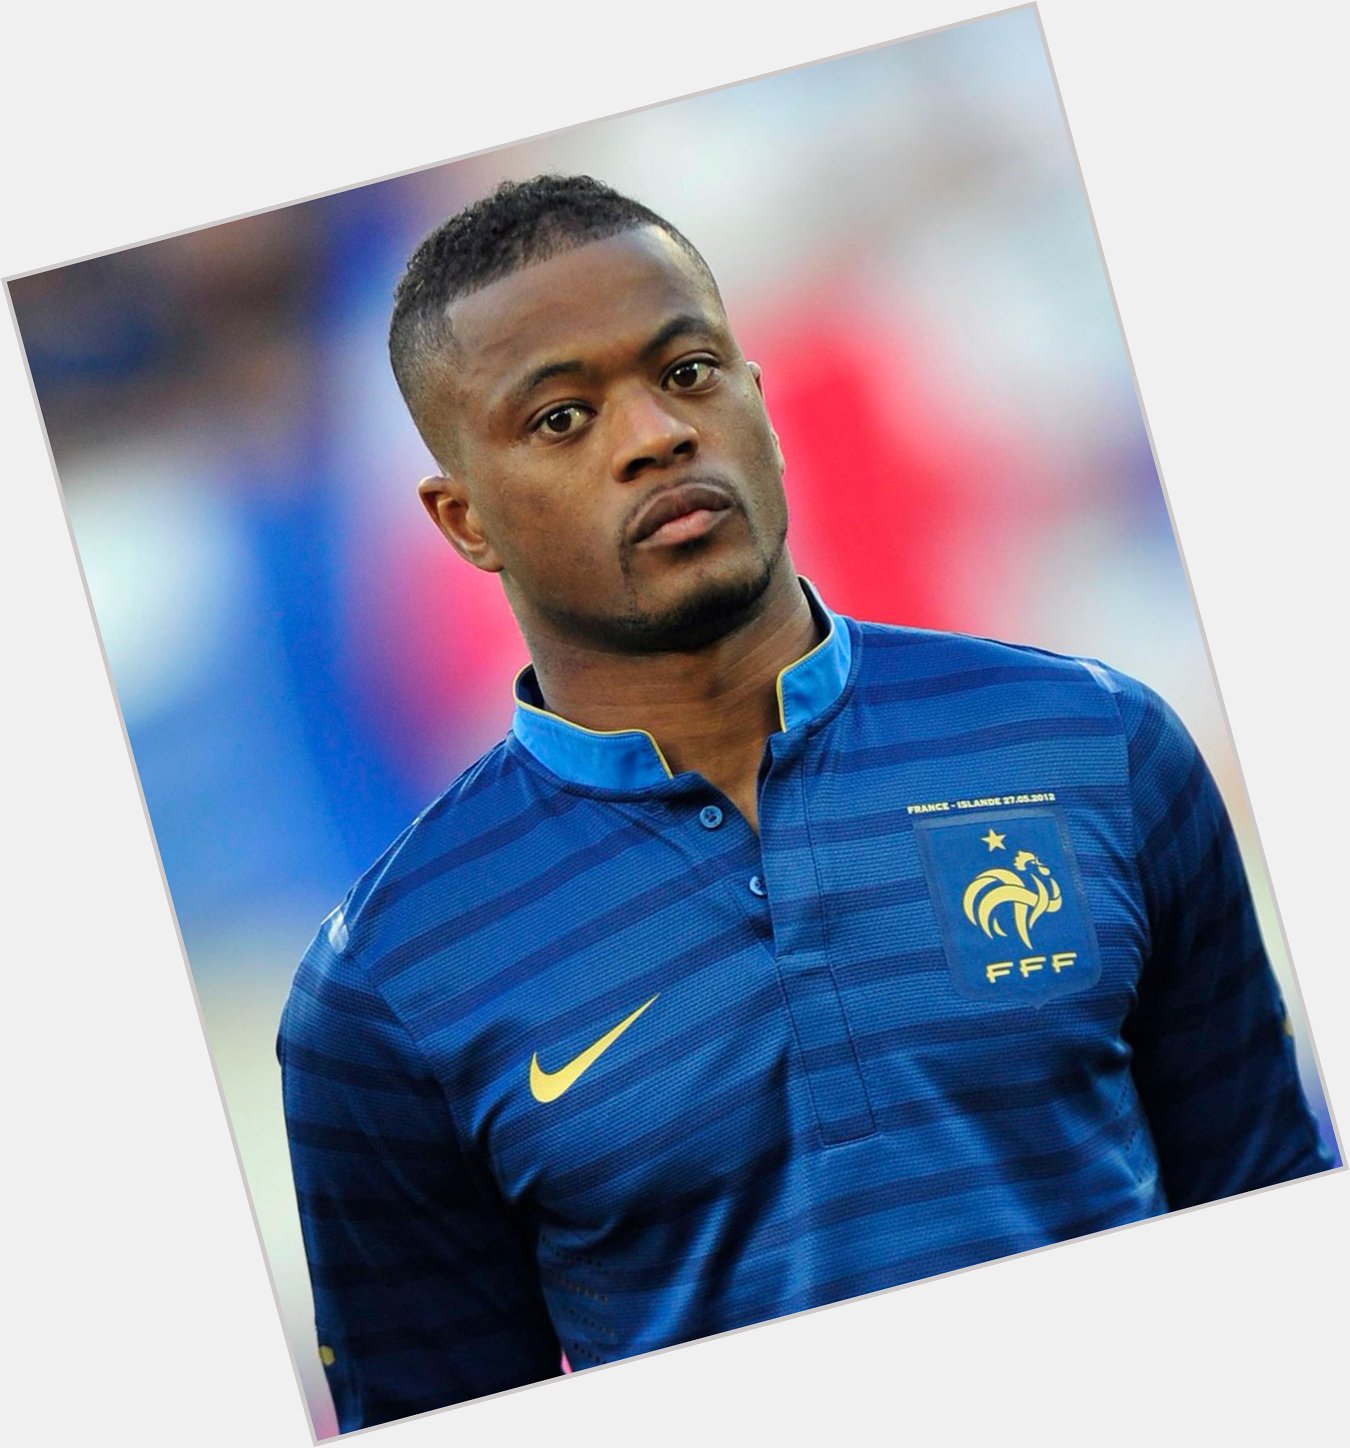  ON WITH Wishes:
Patrice Evra A Happy Birthday! 